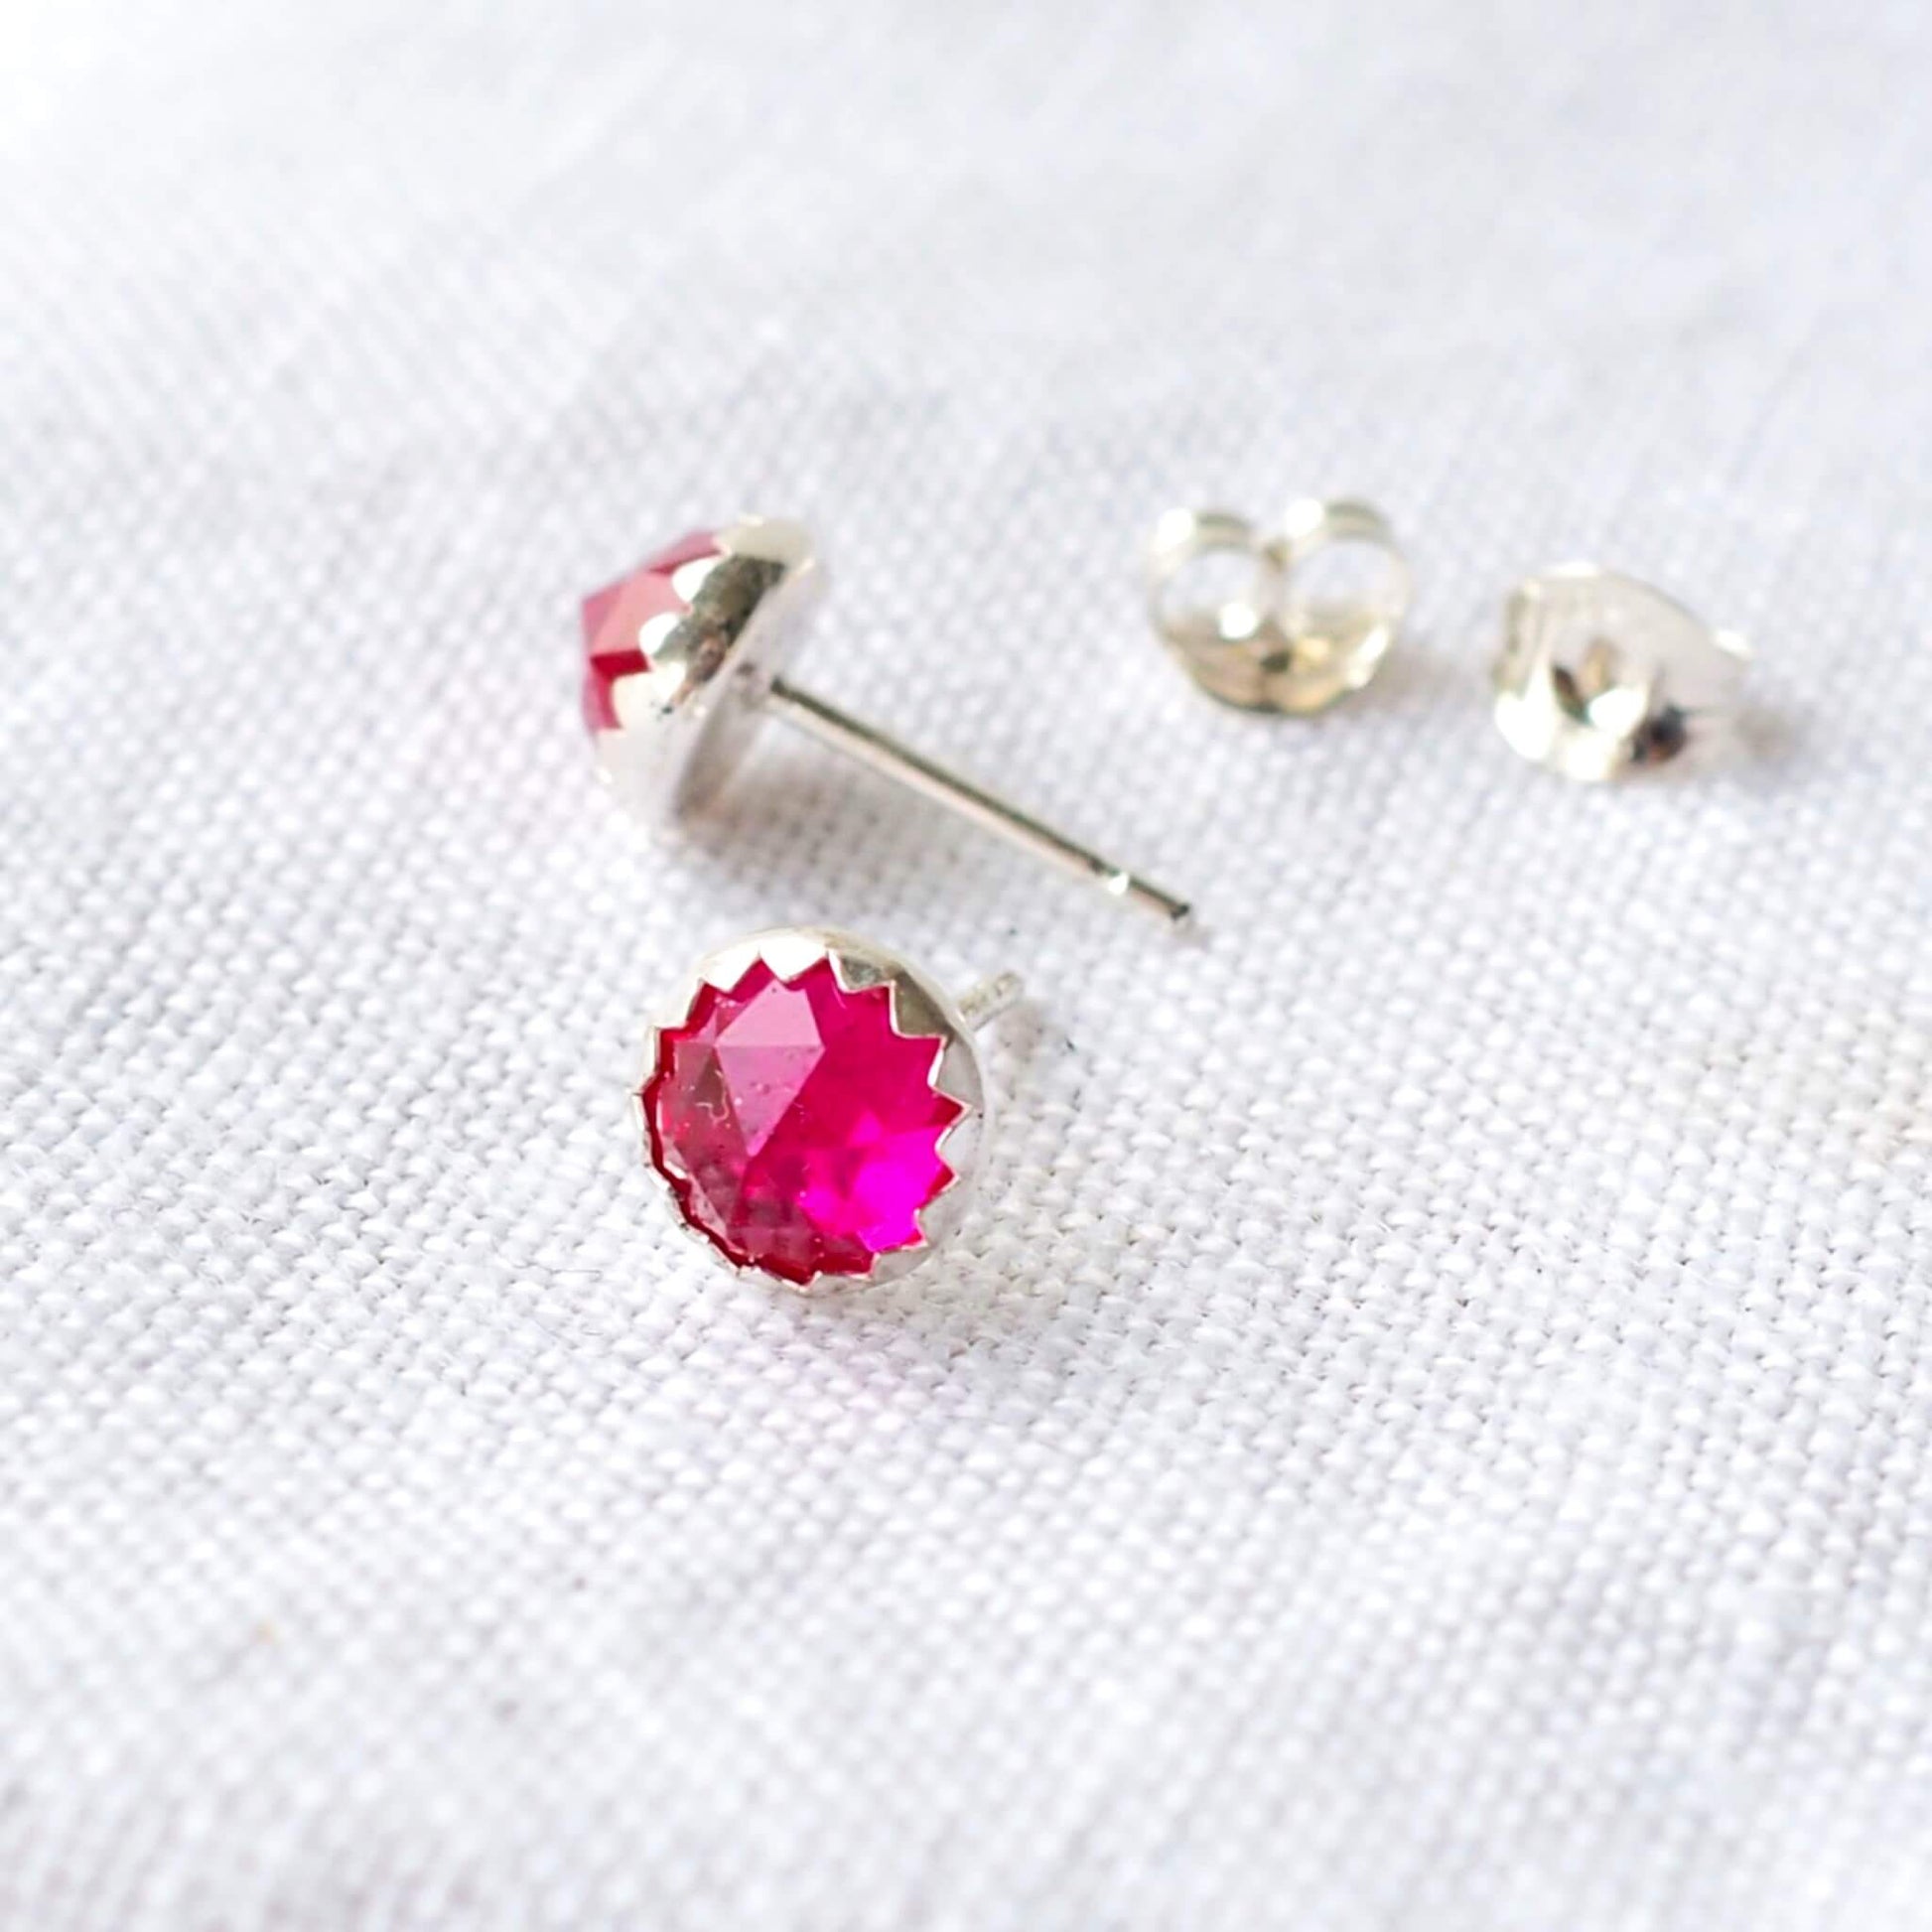 hot pink Gemstone stud earrings with a bright lab ruby artificial gemstone, round and faceted 6m in size. Set onto Sterling Silver settings. Birthstone for July Handmade in Scotland UK by maram jewellery